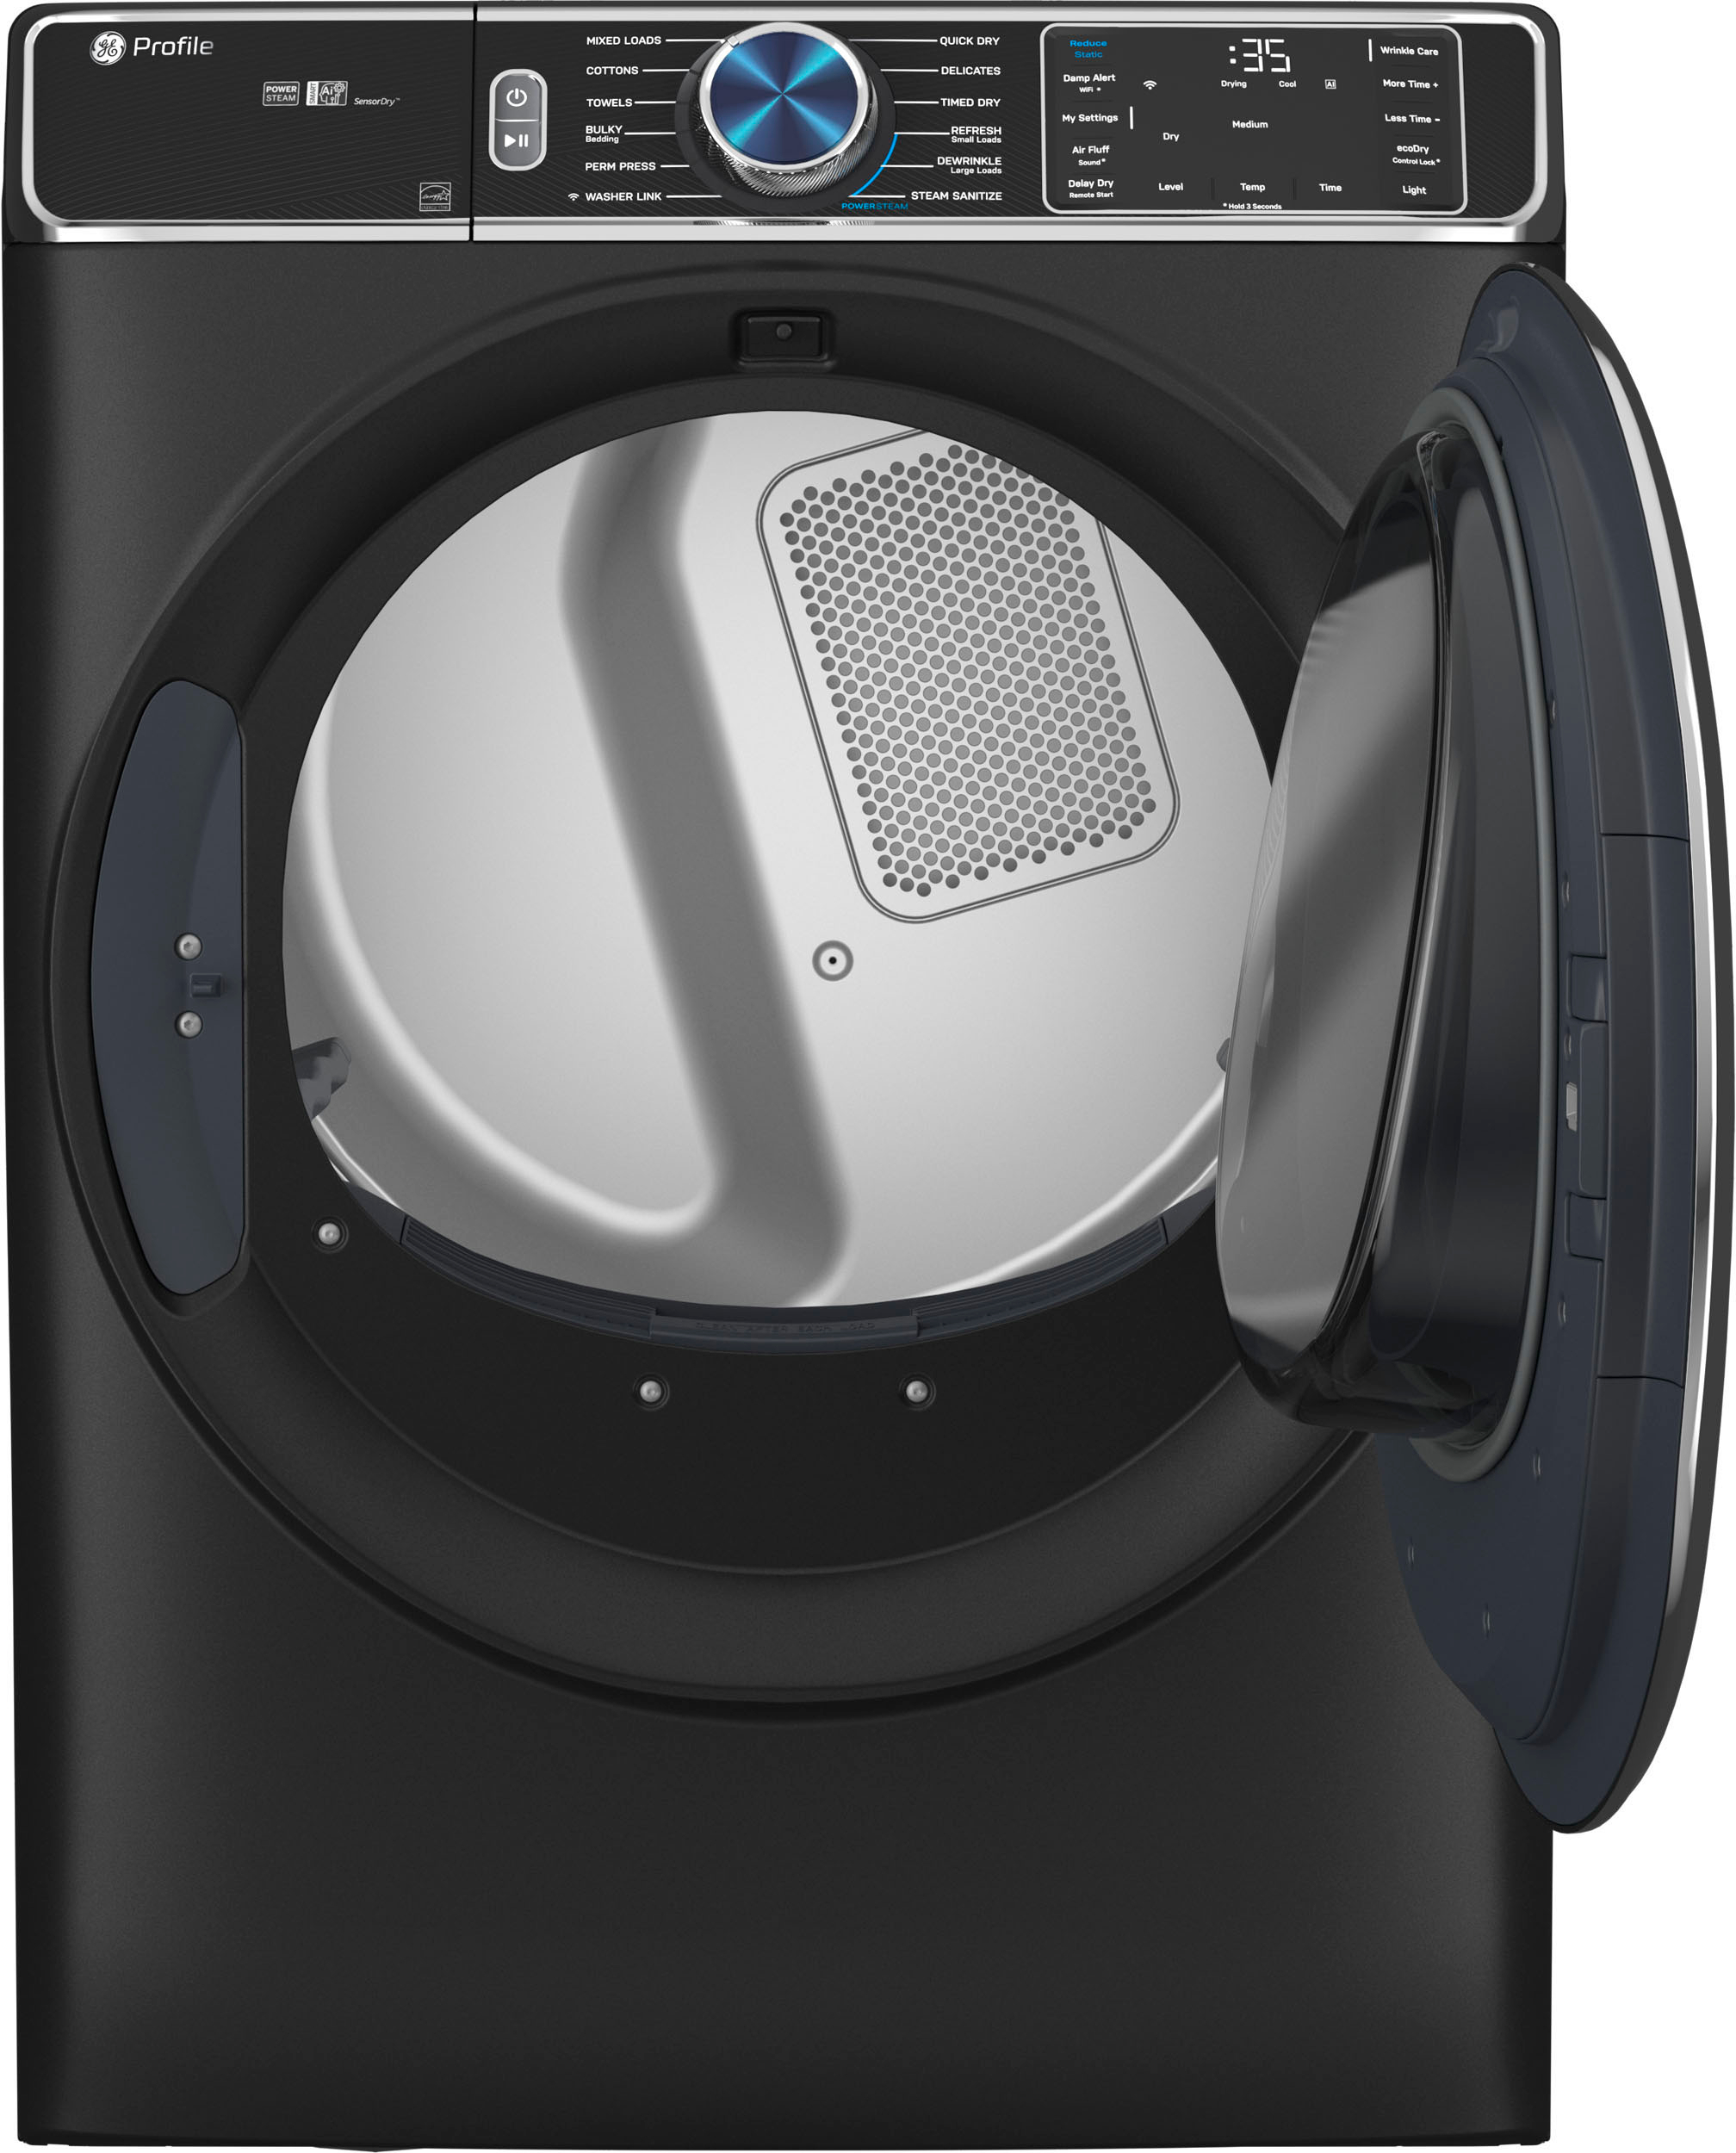 Angle View: GE Profile - 7.8 cu. ft. Smart Front Load Electric Dryer with Steam and Sanitize Cycle and Washer Link - Carbon graphite